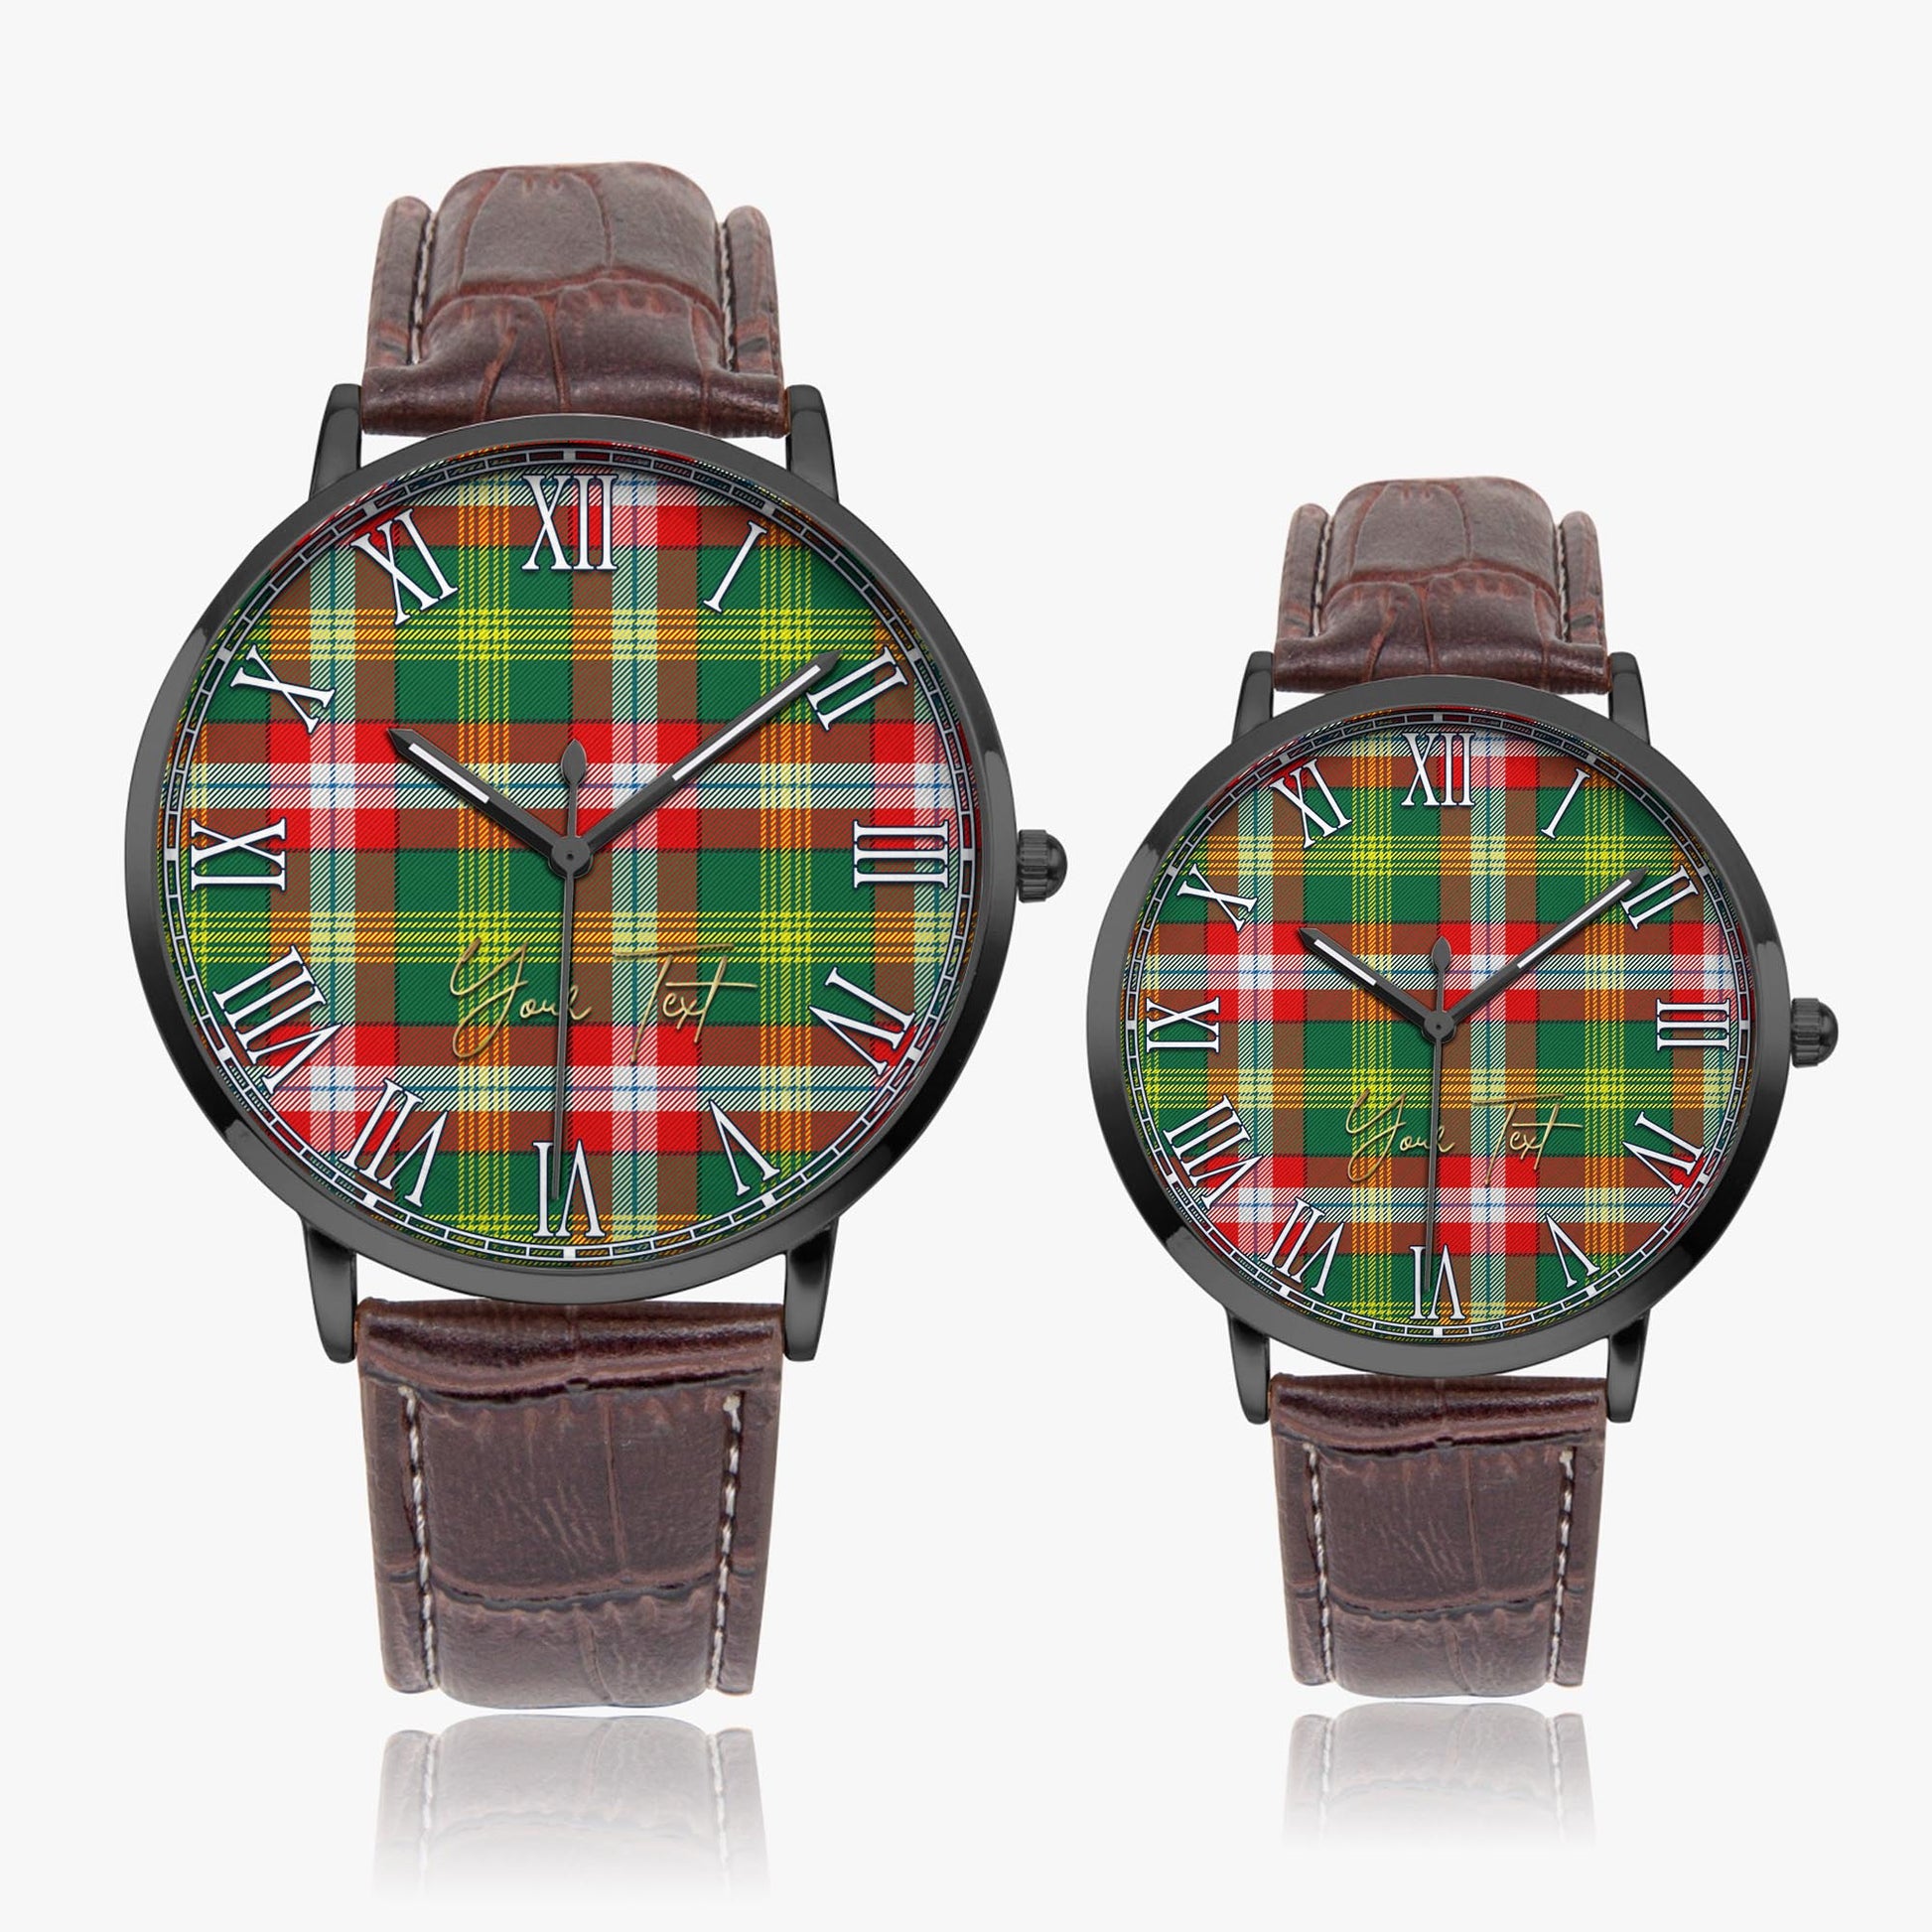 Northwest Territories Canada Tartan Personalized Your Text Leather Trap Quartz Watch Ultra Thin Black Case With Brown Leather Strap - Tartanvibesclothing